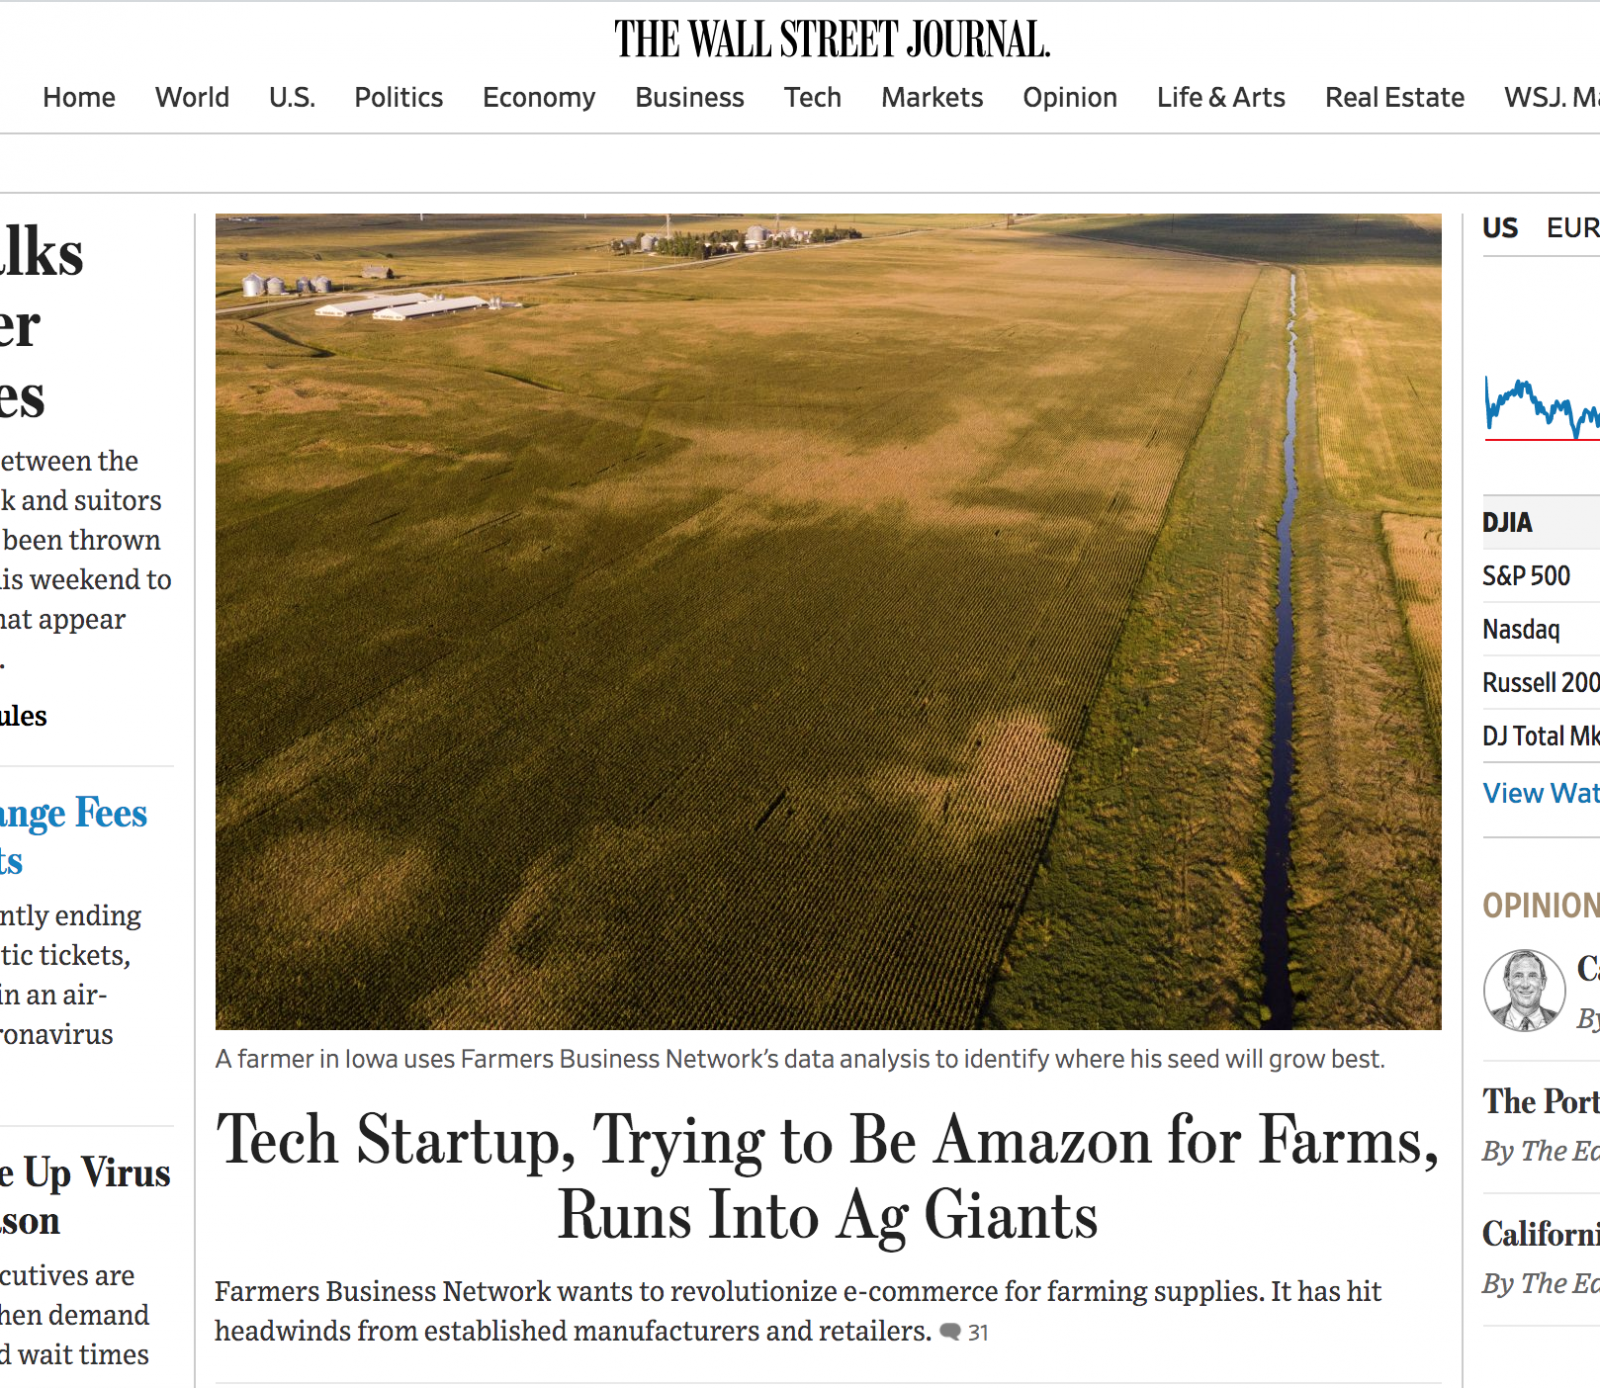 Tech Startup, Trying to Be Amazon for Farms, Runs Into Ag Giants